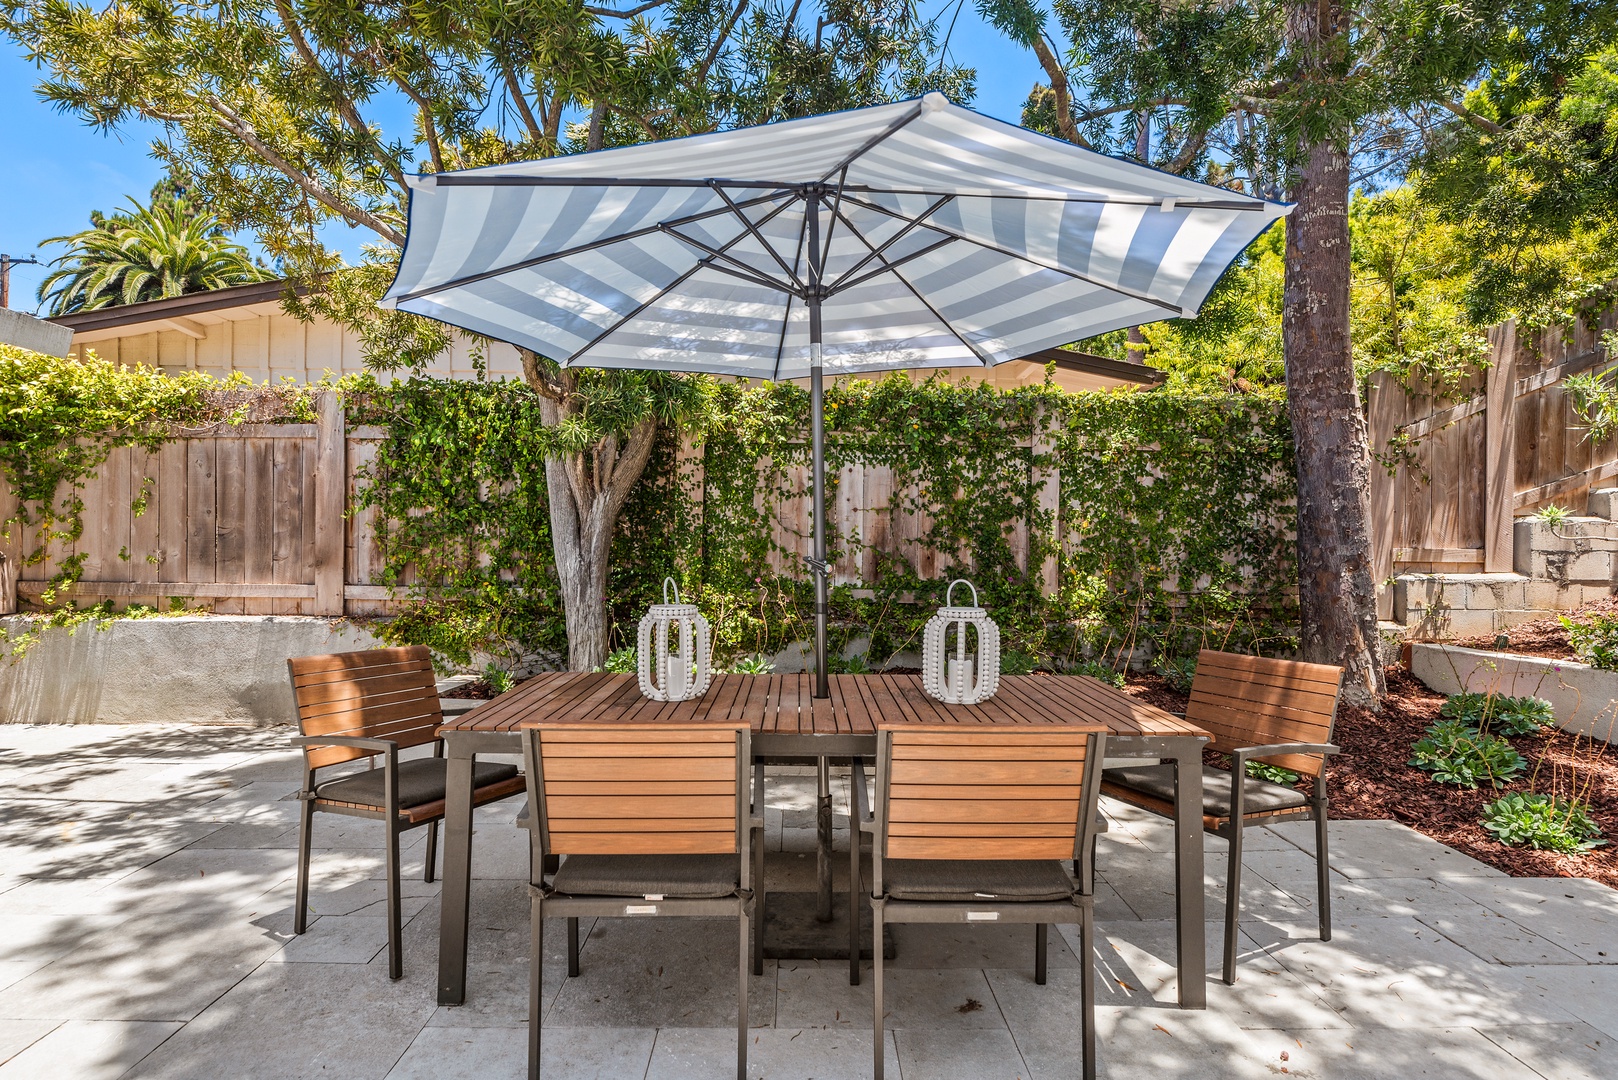 Del Mar Vacation Rentals, Del Mar Zuni Delight - Whether you're here for a family vacation or a corporate retreat, this home has everything you need to relax and recharge.